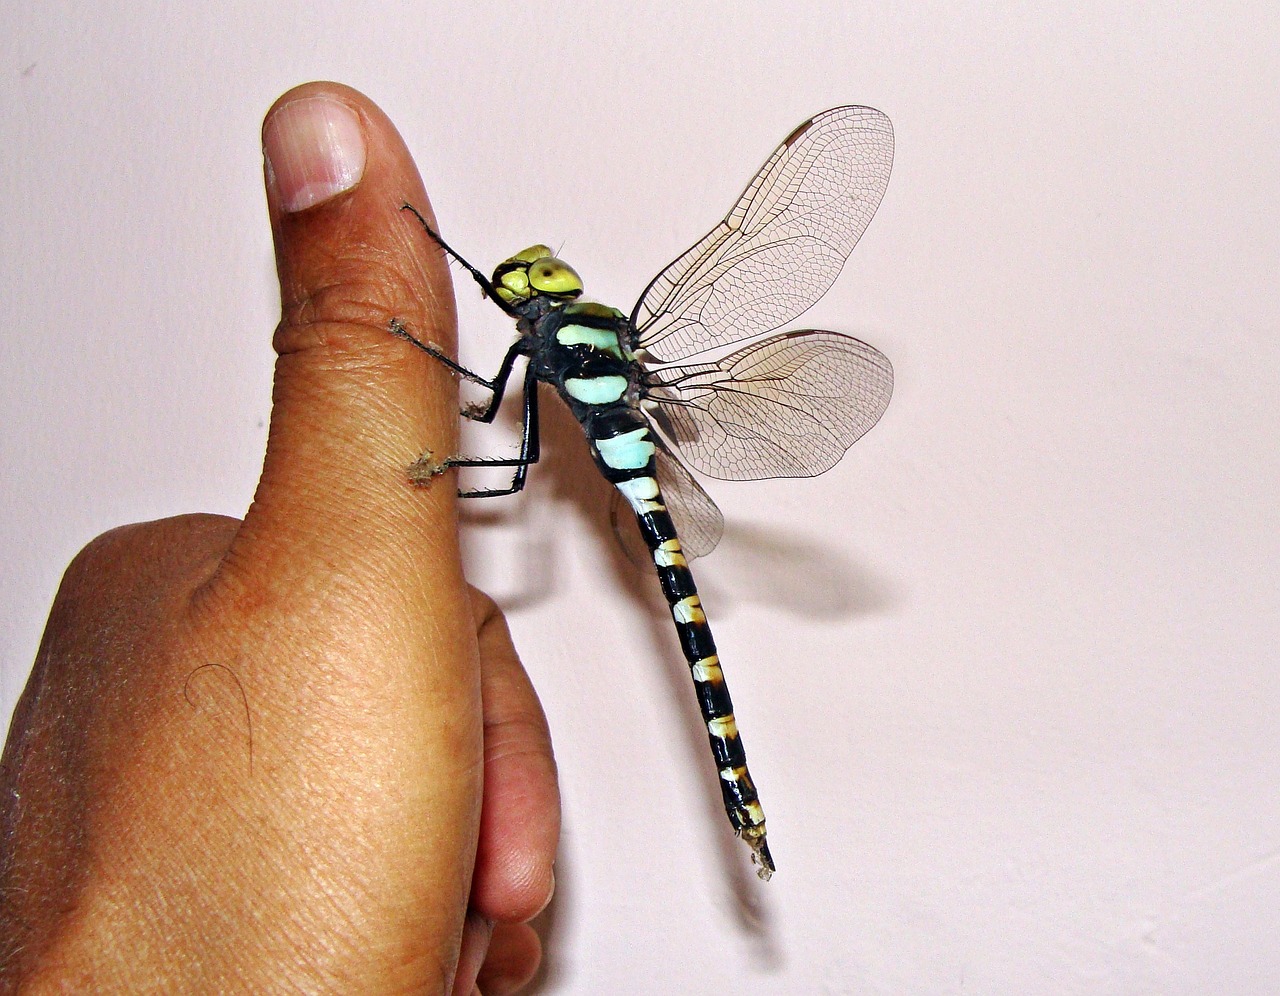 dragonfly insect hand free photo